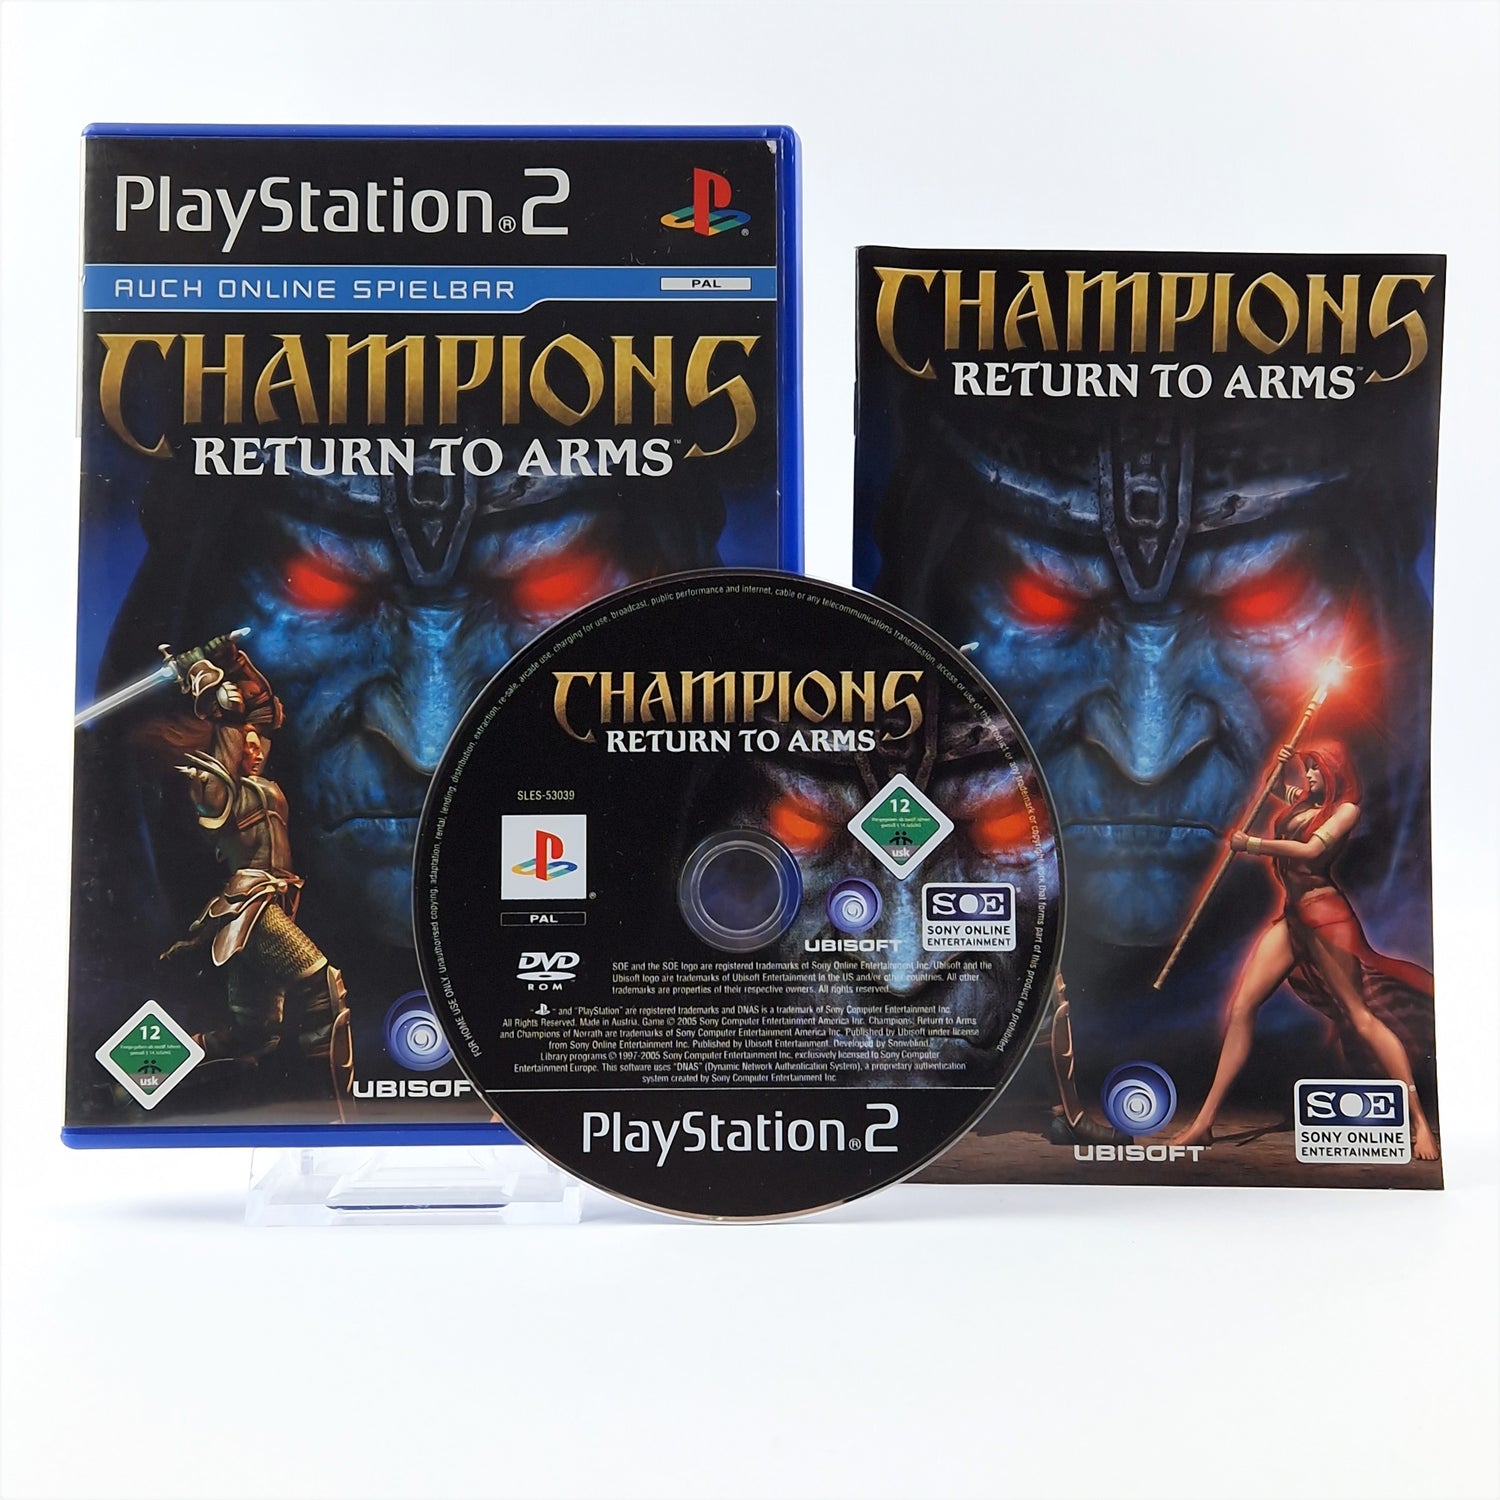 Playstation 2 Spiel : Champions Return to Arms - OVP Anleitung CD | PS2 PAL Game